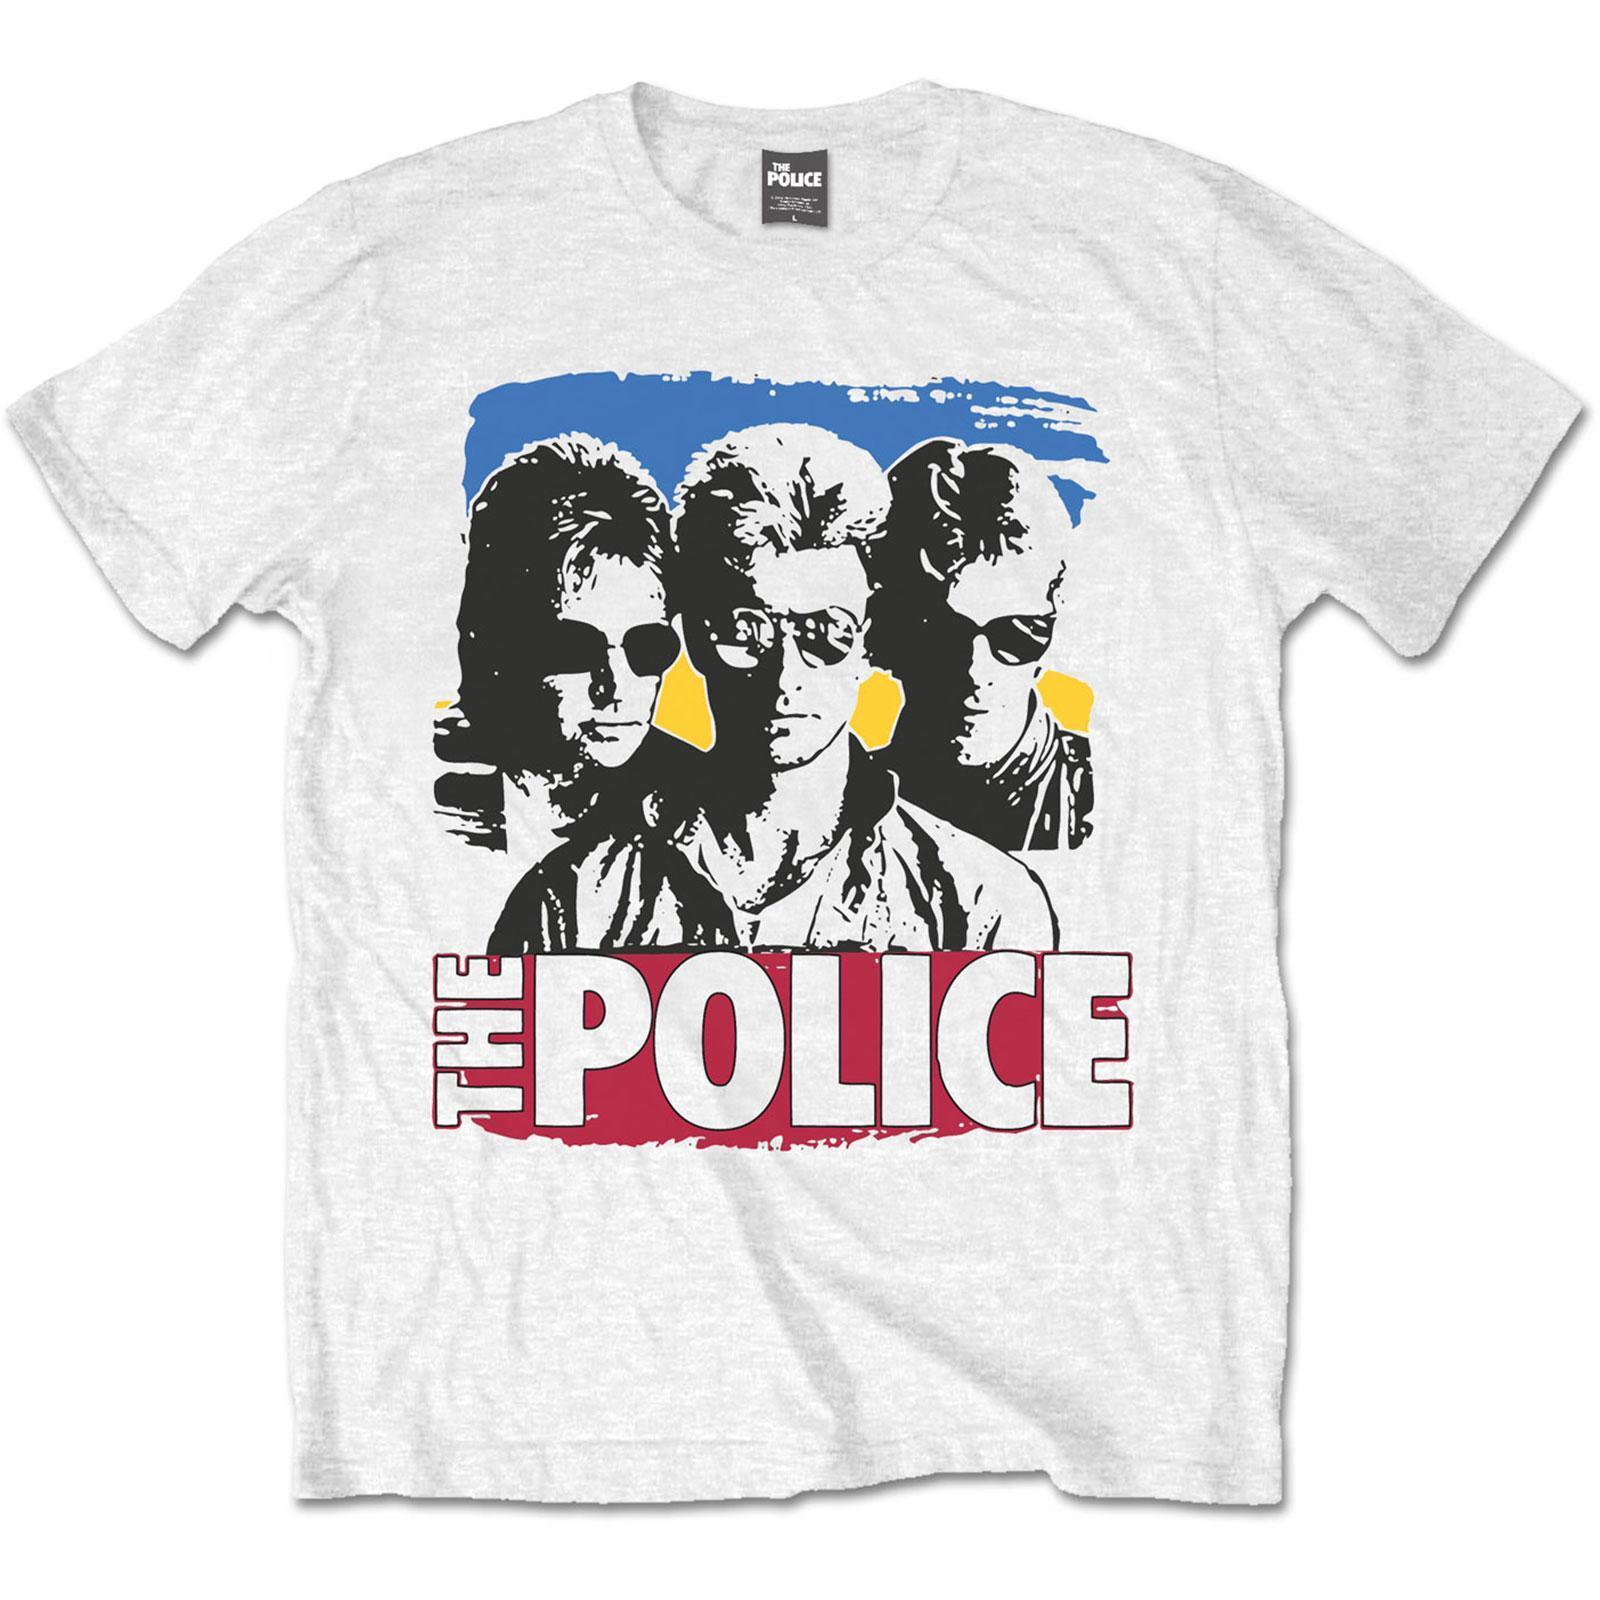 The Police Unisex Adult Band Cotton T-Shirt (White) (XL)